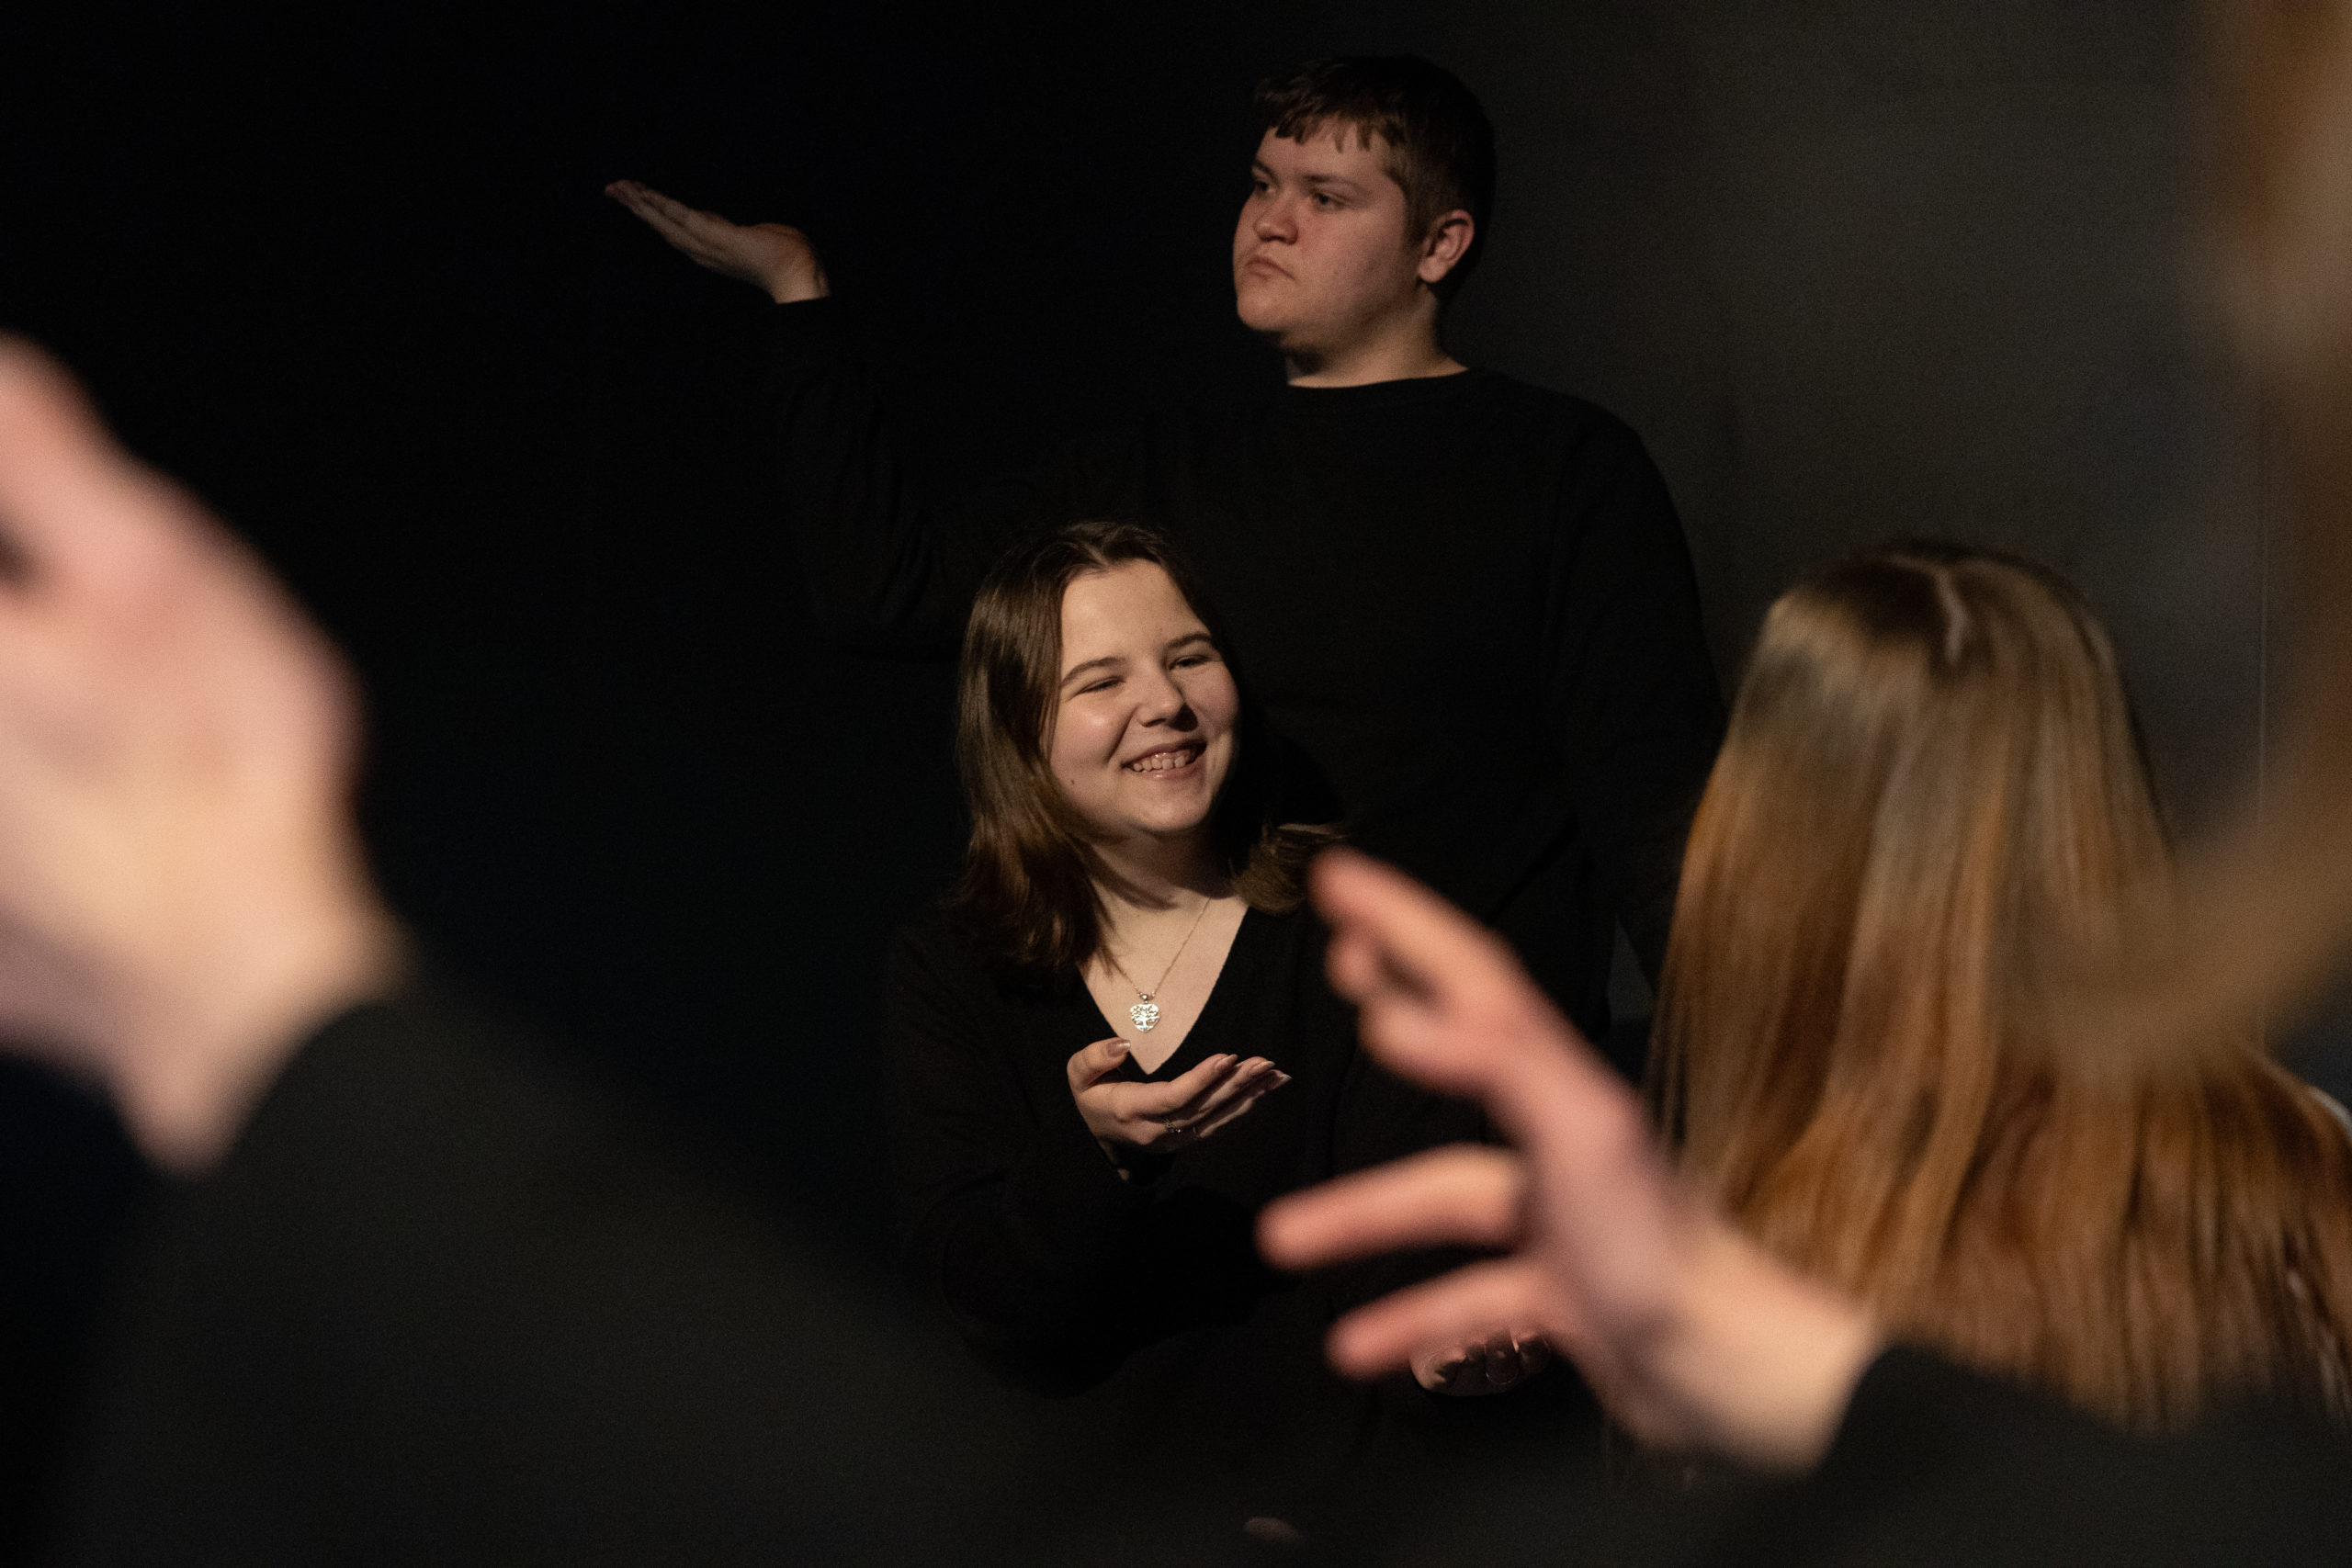 Four performing arts students in a drama studio acting and posing